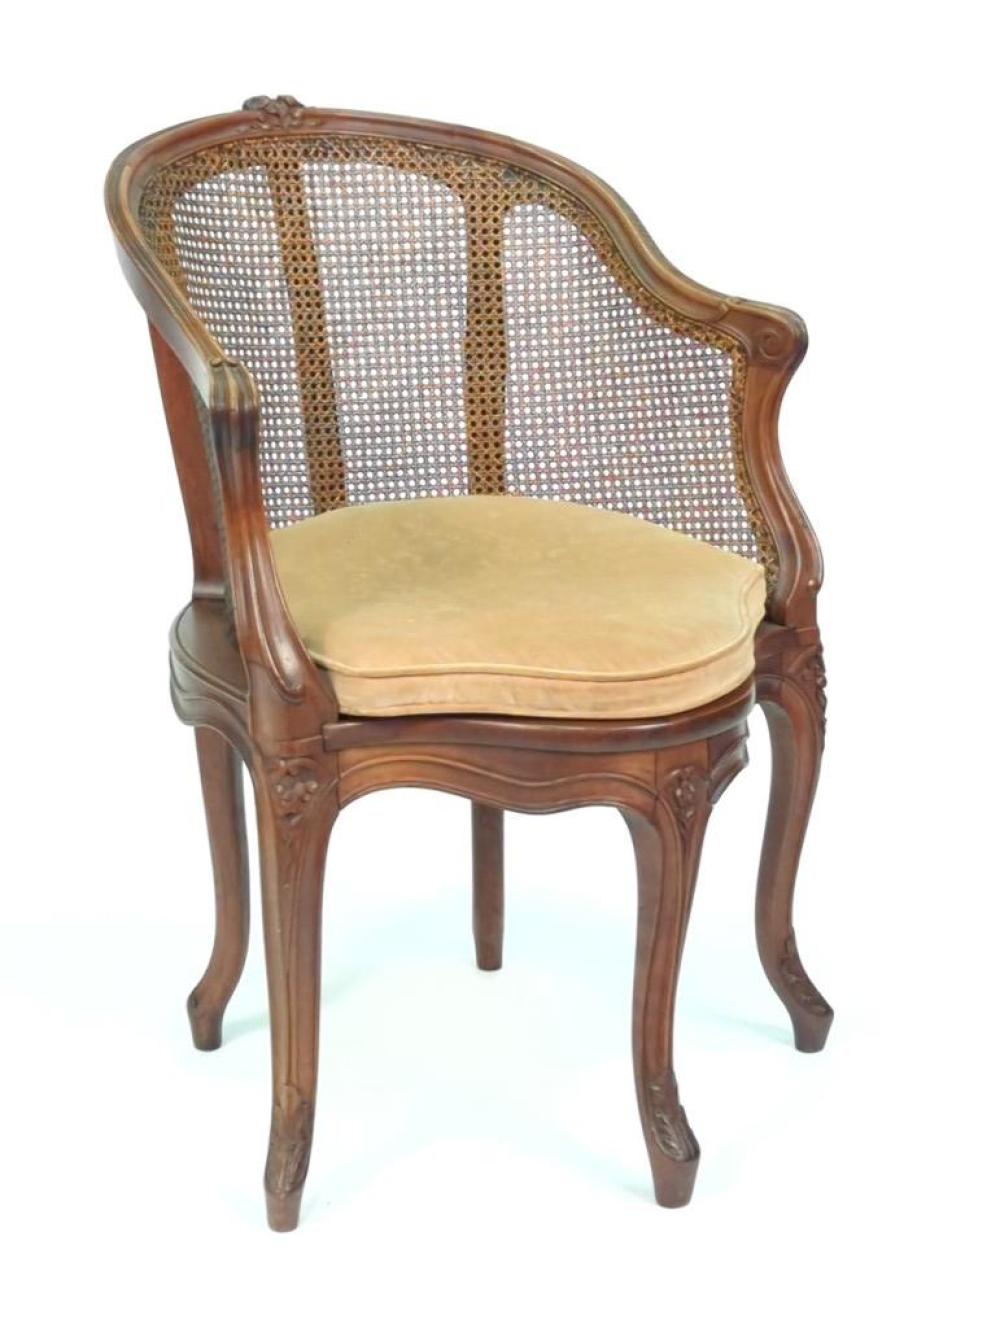 FRENCH LOUIS XV STYLE CANED CORNER